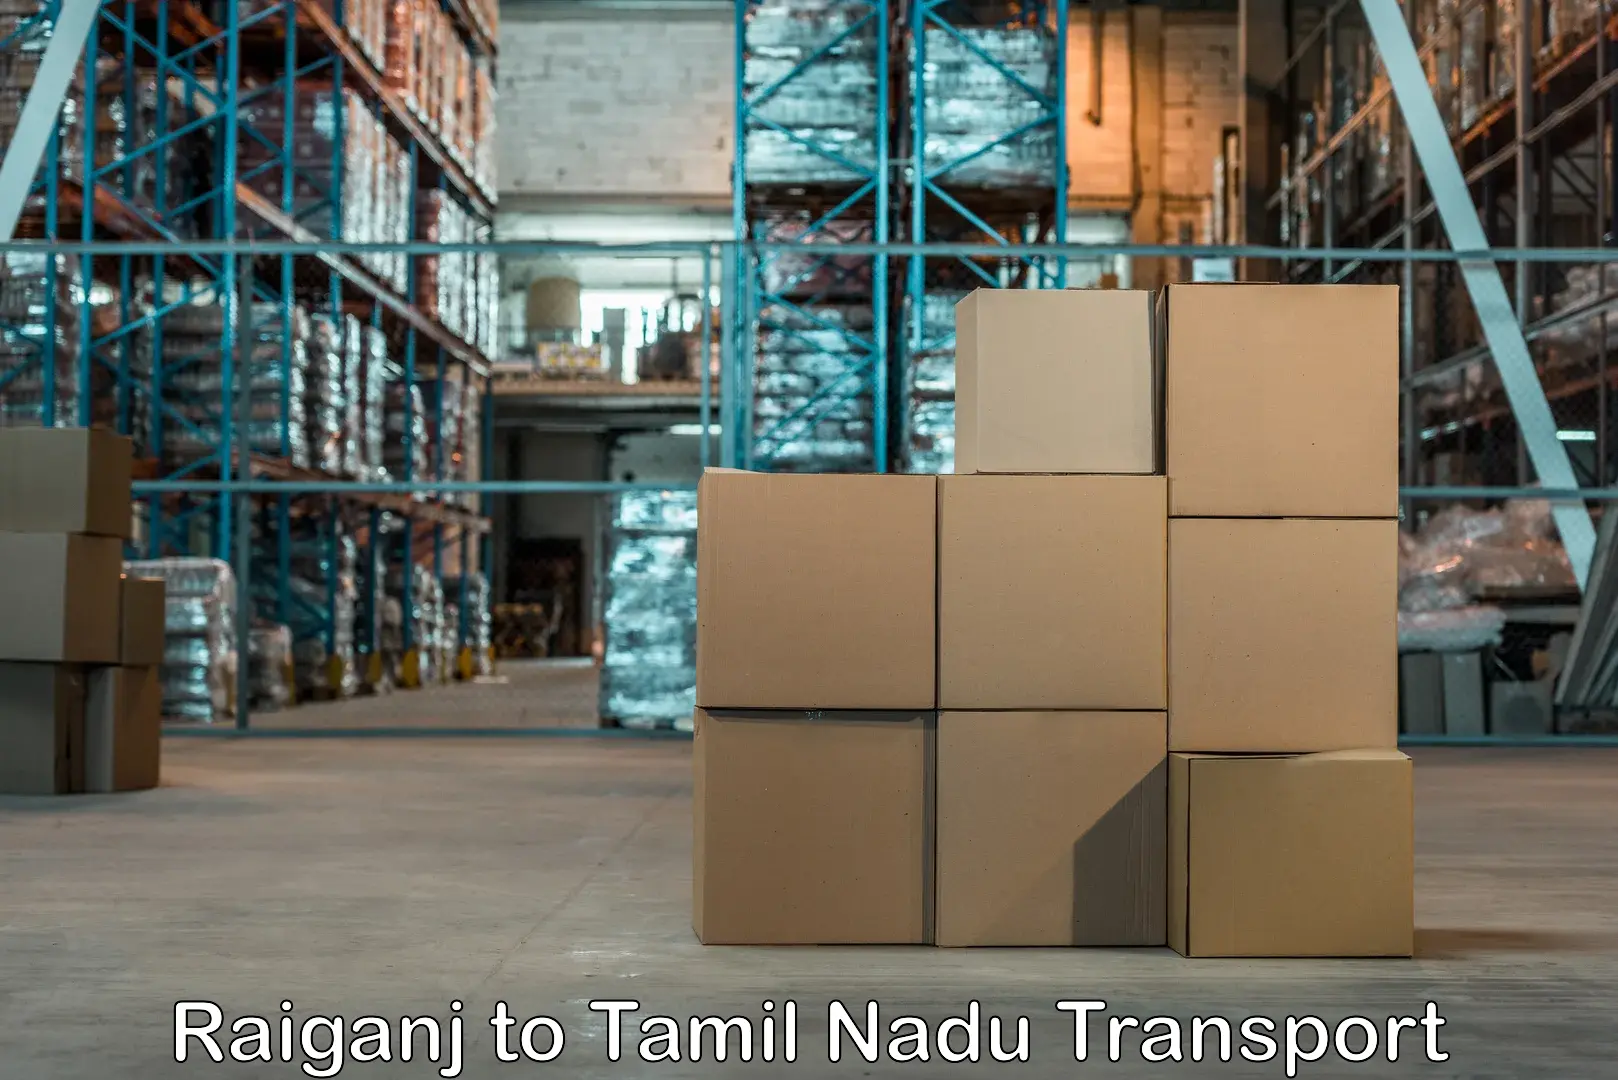 Commercial transport service Raiganj to Ennore Port Chennai